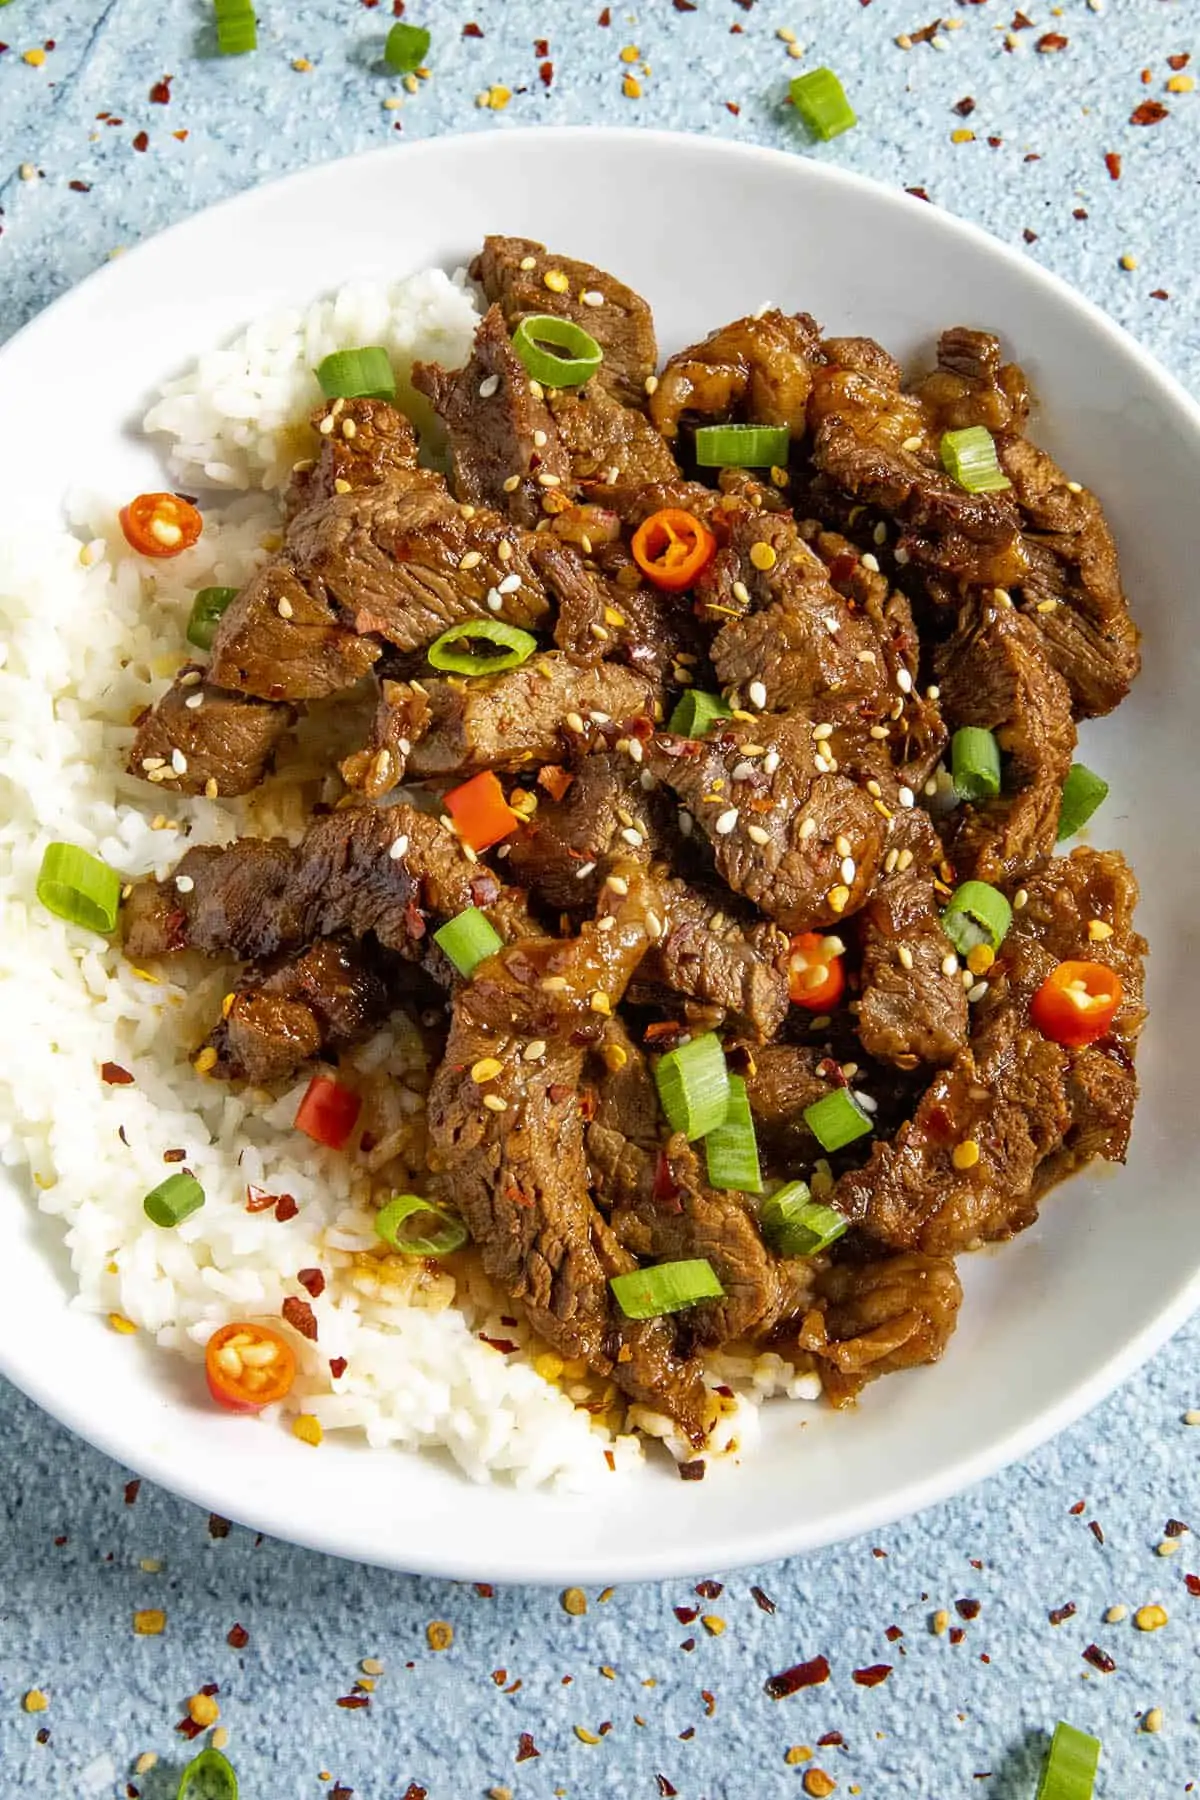 Bulgogi in a bowl, garnished with sesame seeds, green onion and peppers